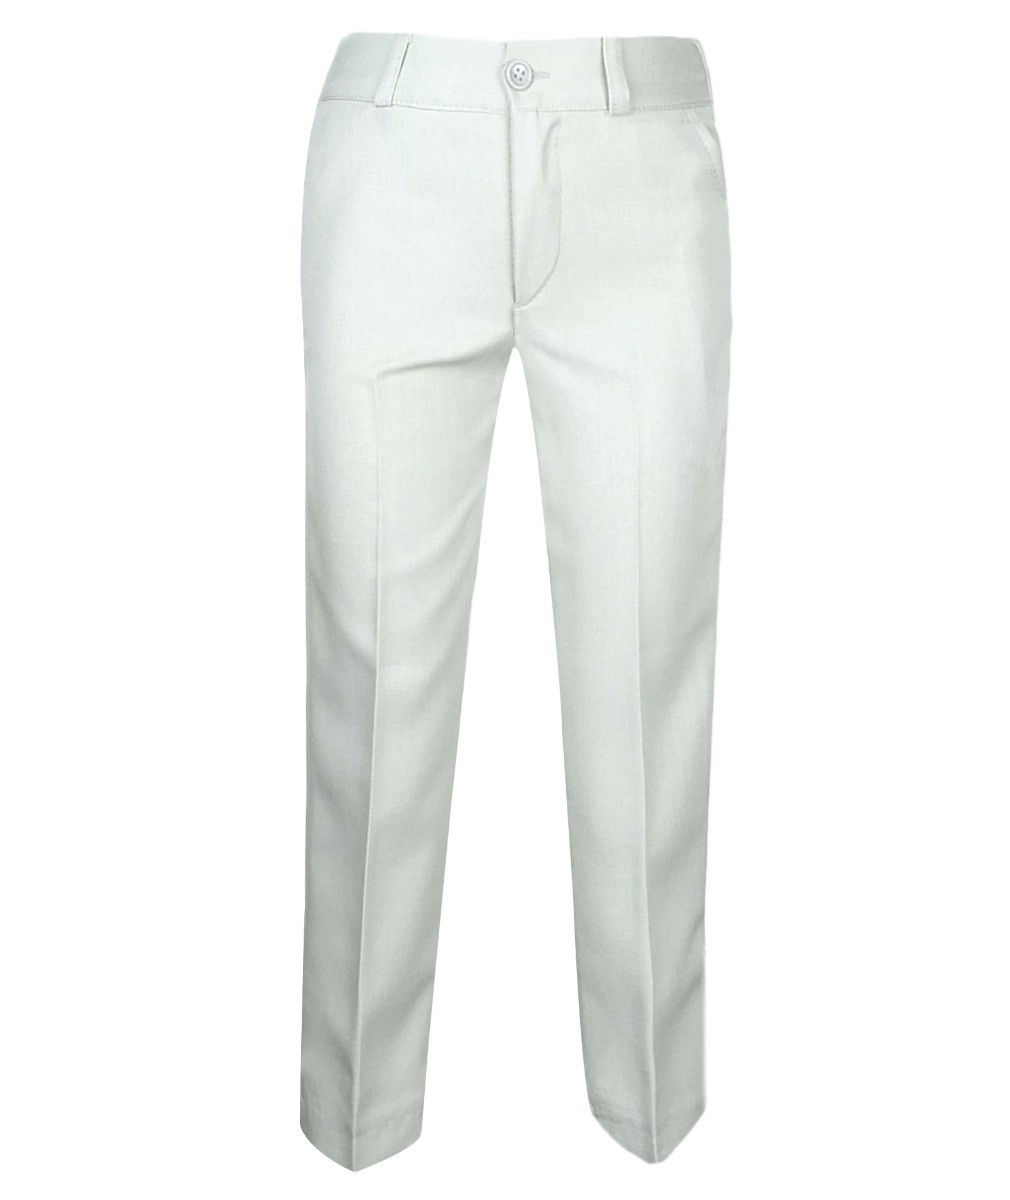 Boys Formal  Suit Trousers - Cream